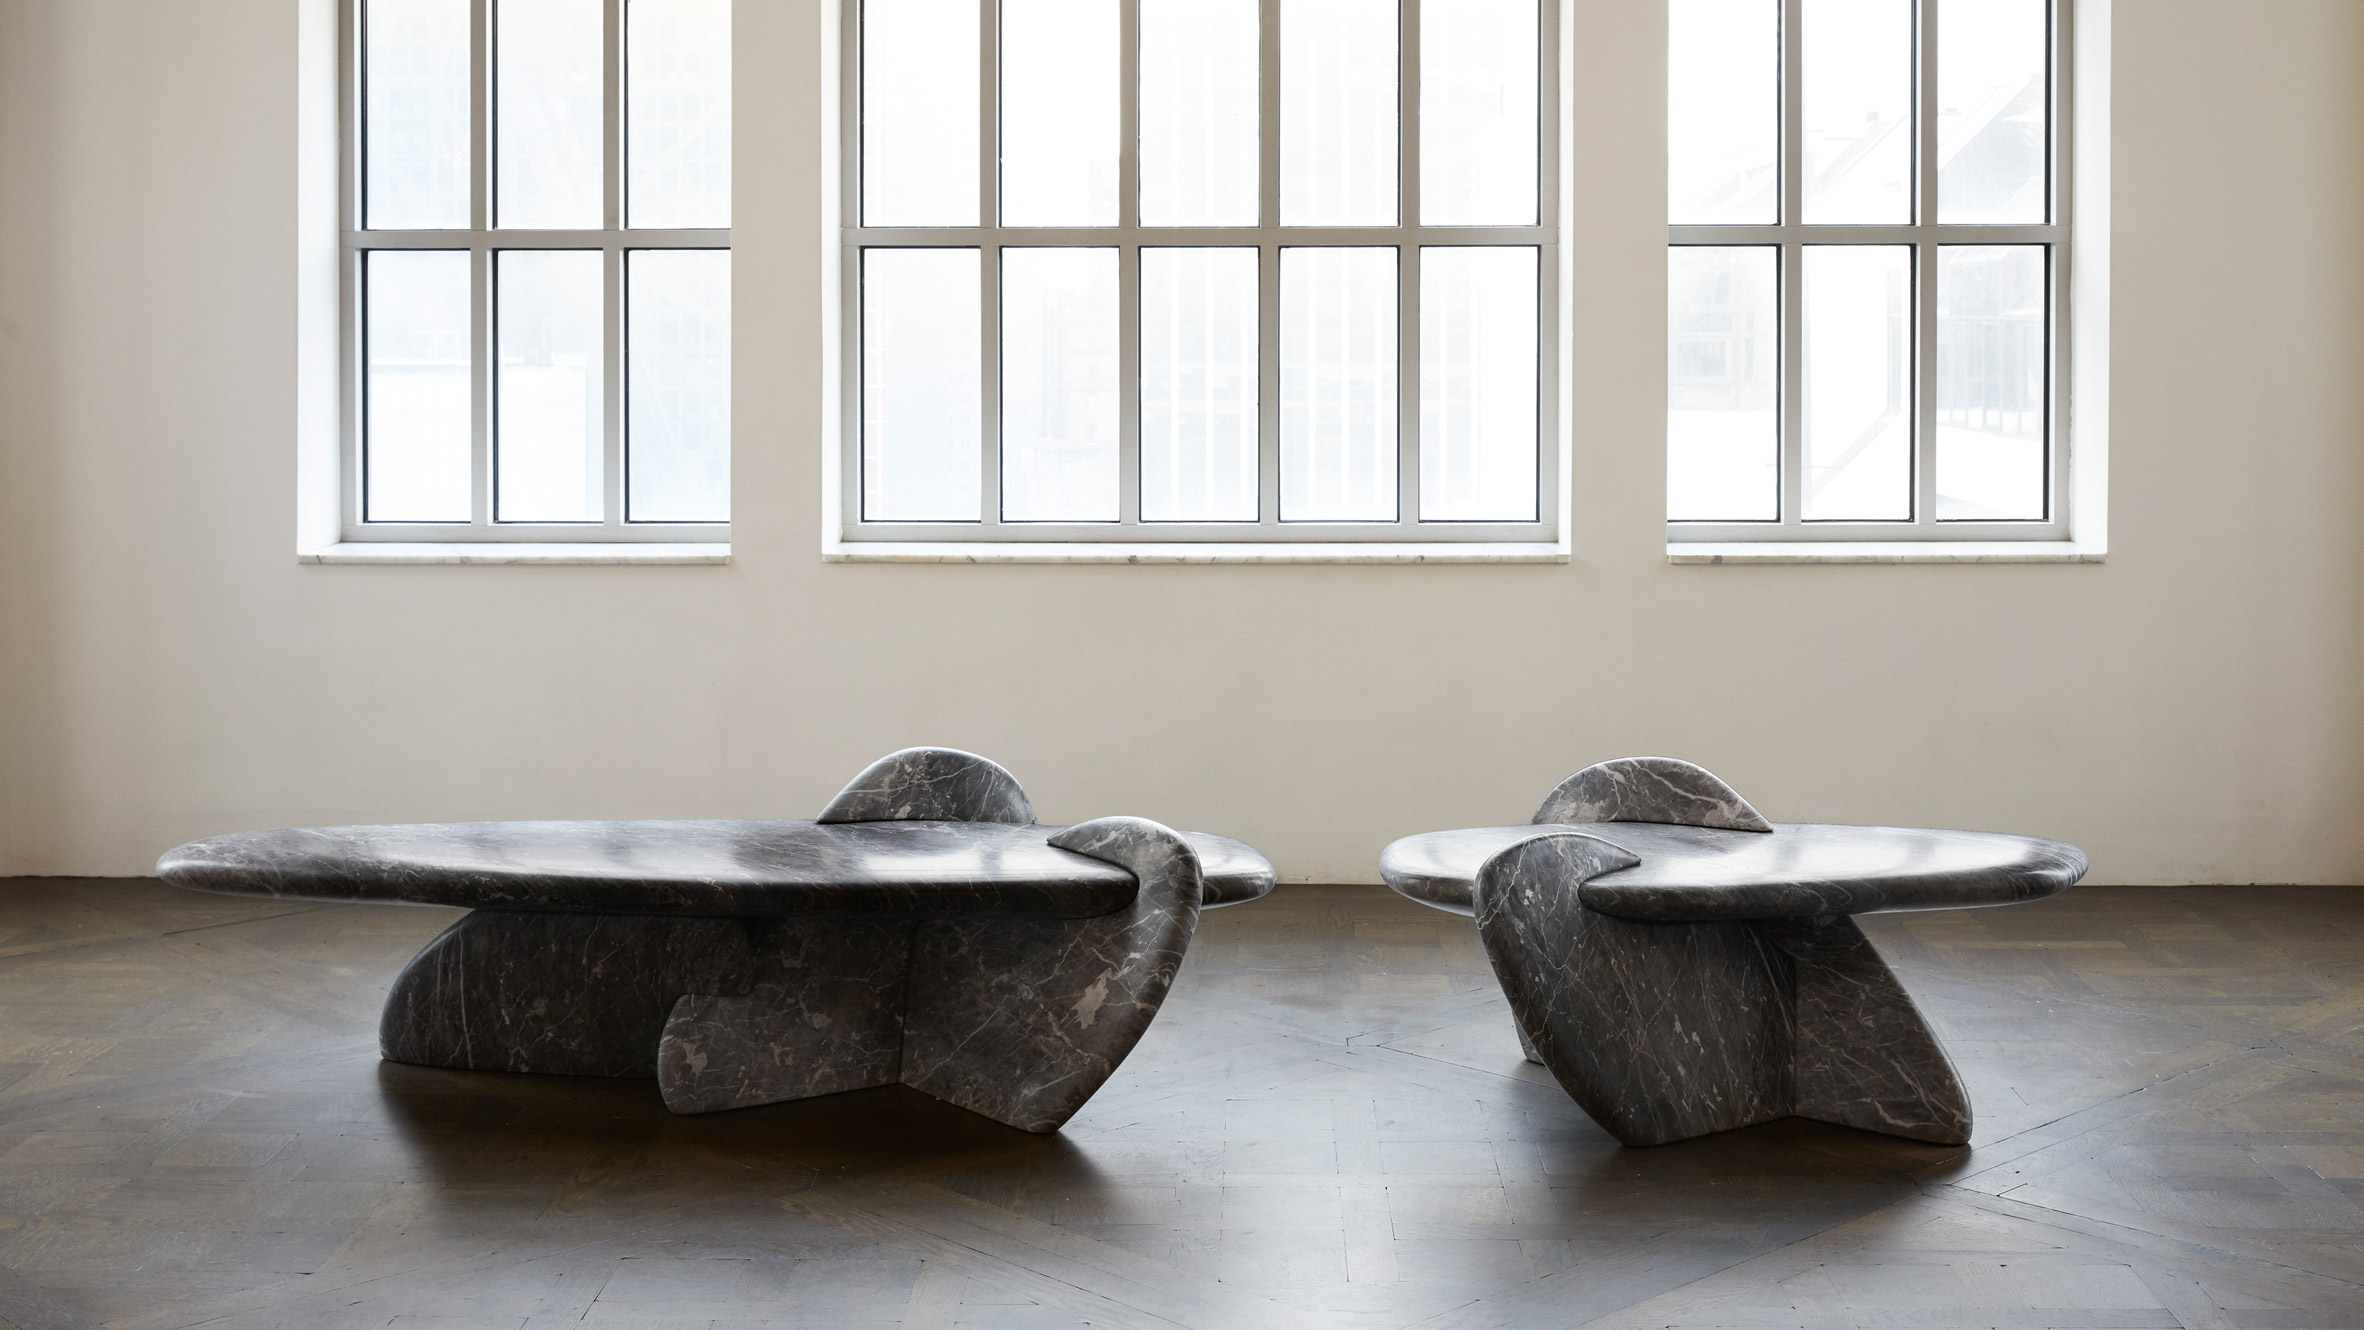 Charles Trevelyan Exhibits Pebble Like Benches In New York